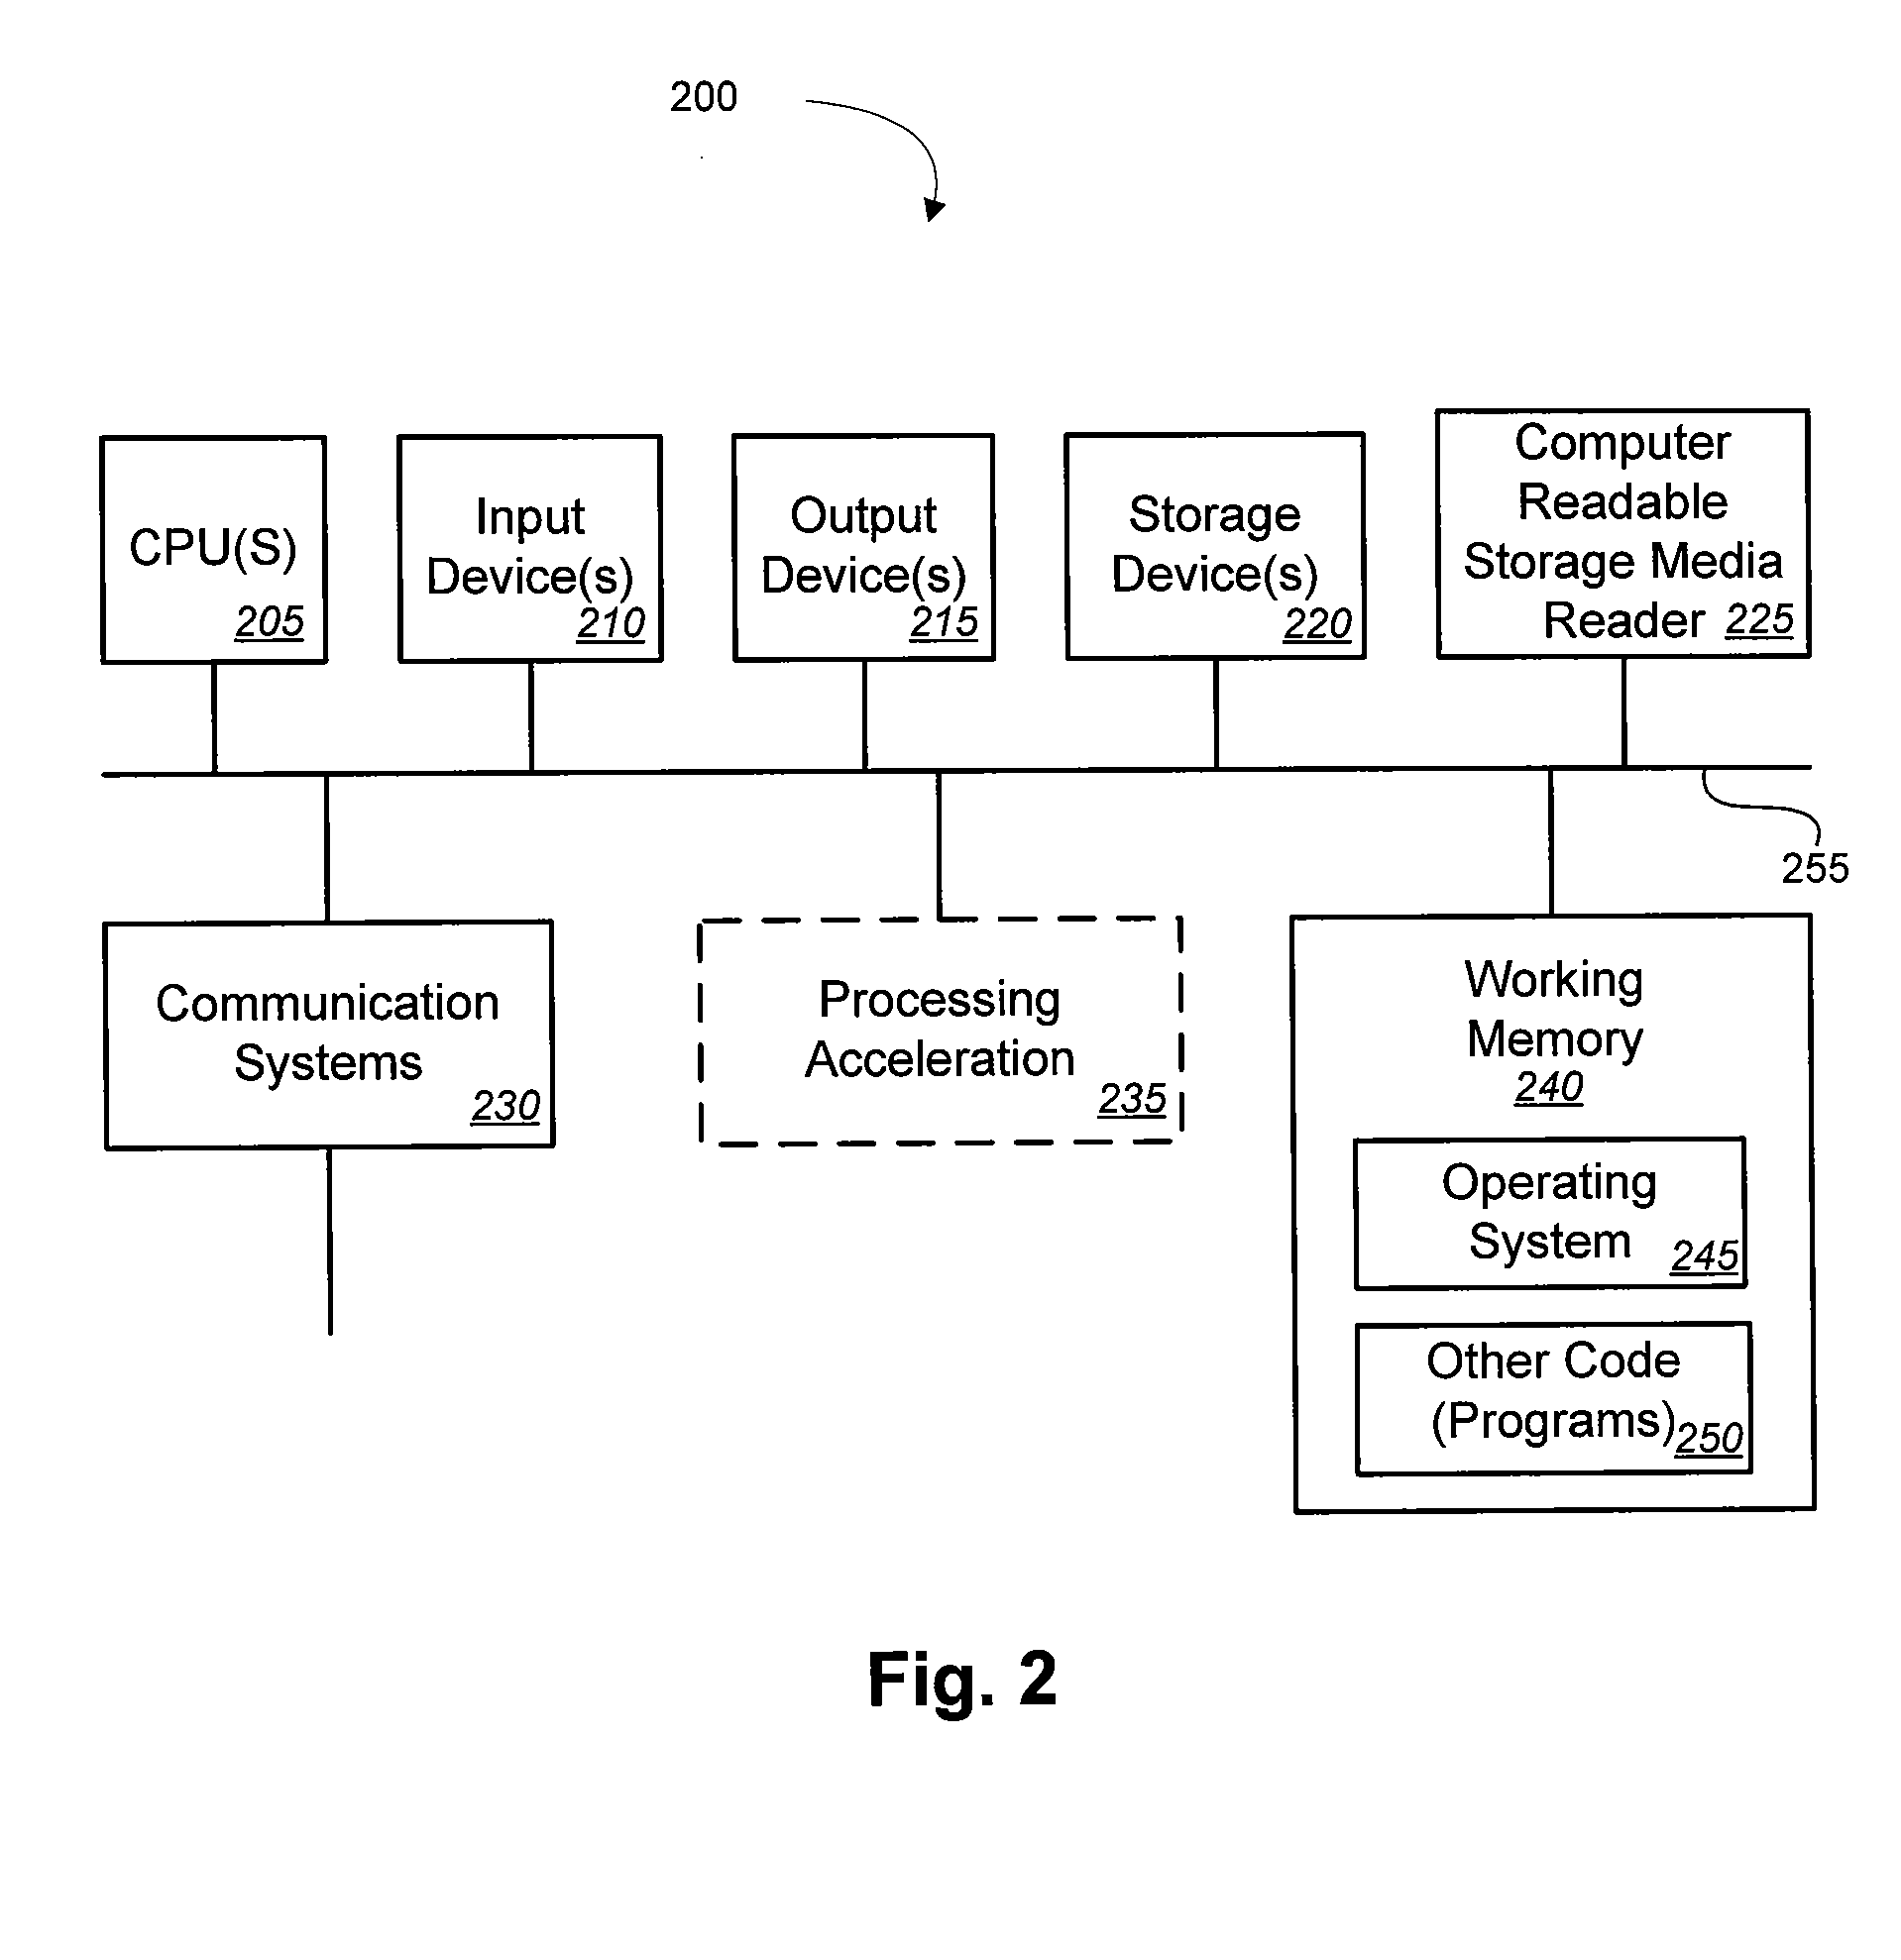 Methods and systems for implementing a dynamic hierarchical data viewer